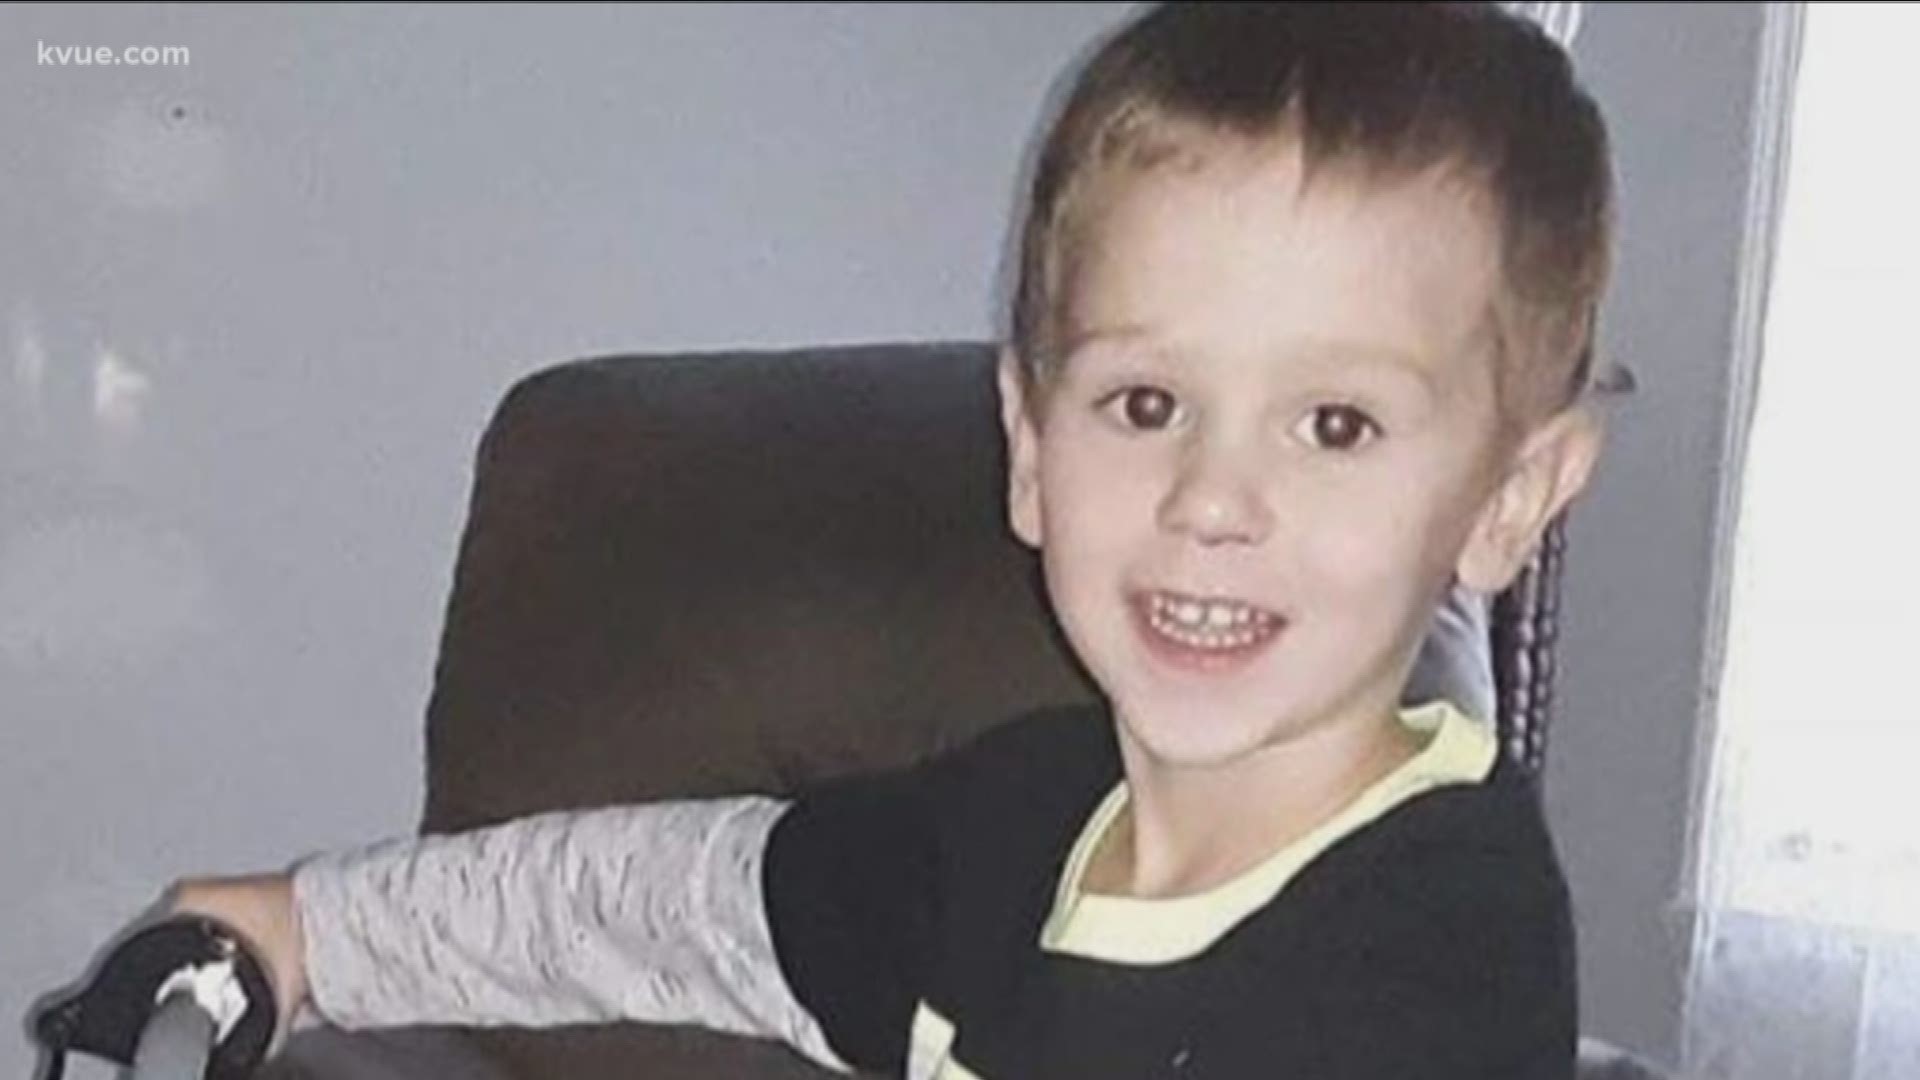 A three-year-old North Carolina boy who went missing while playing in his grandmother's backyard has been found.